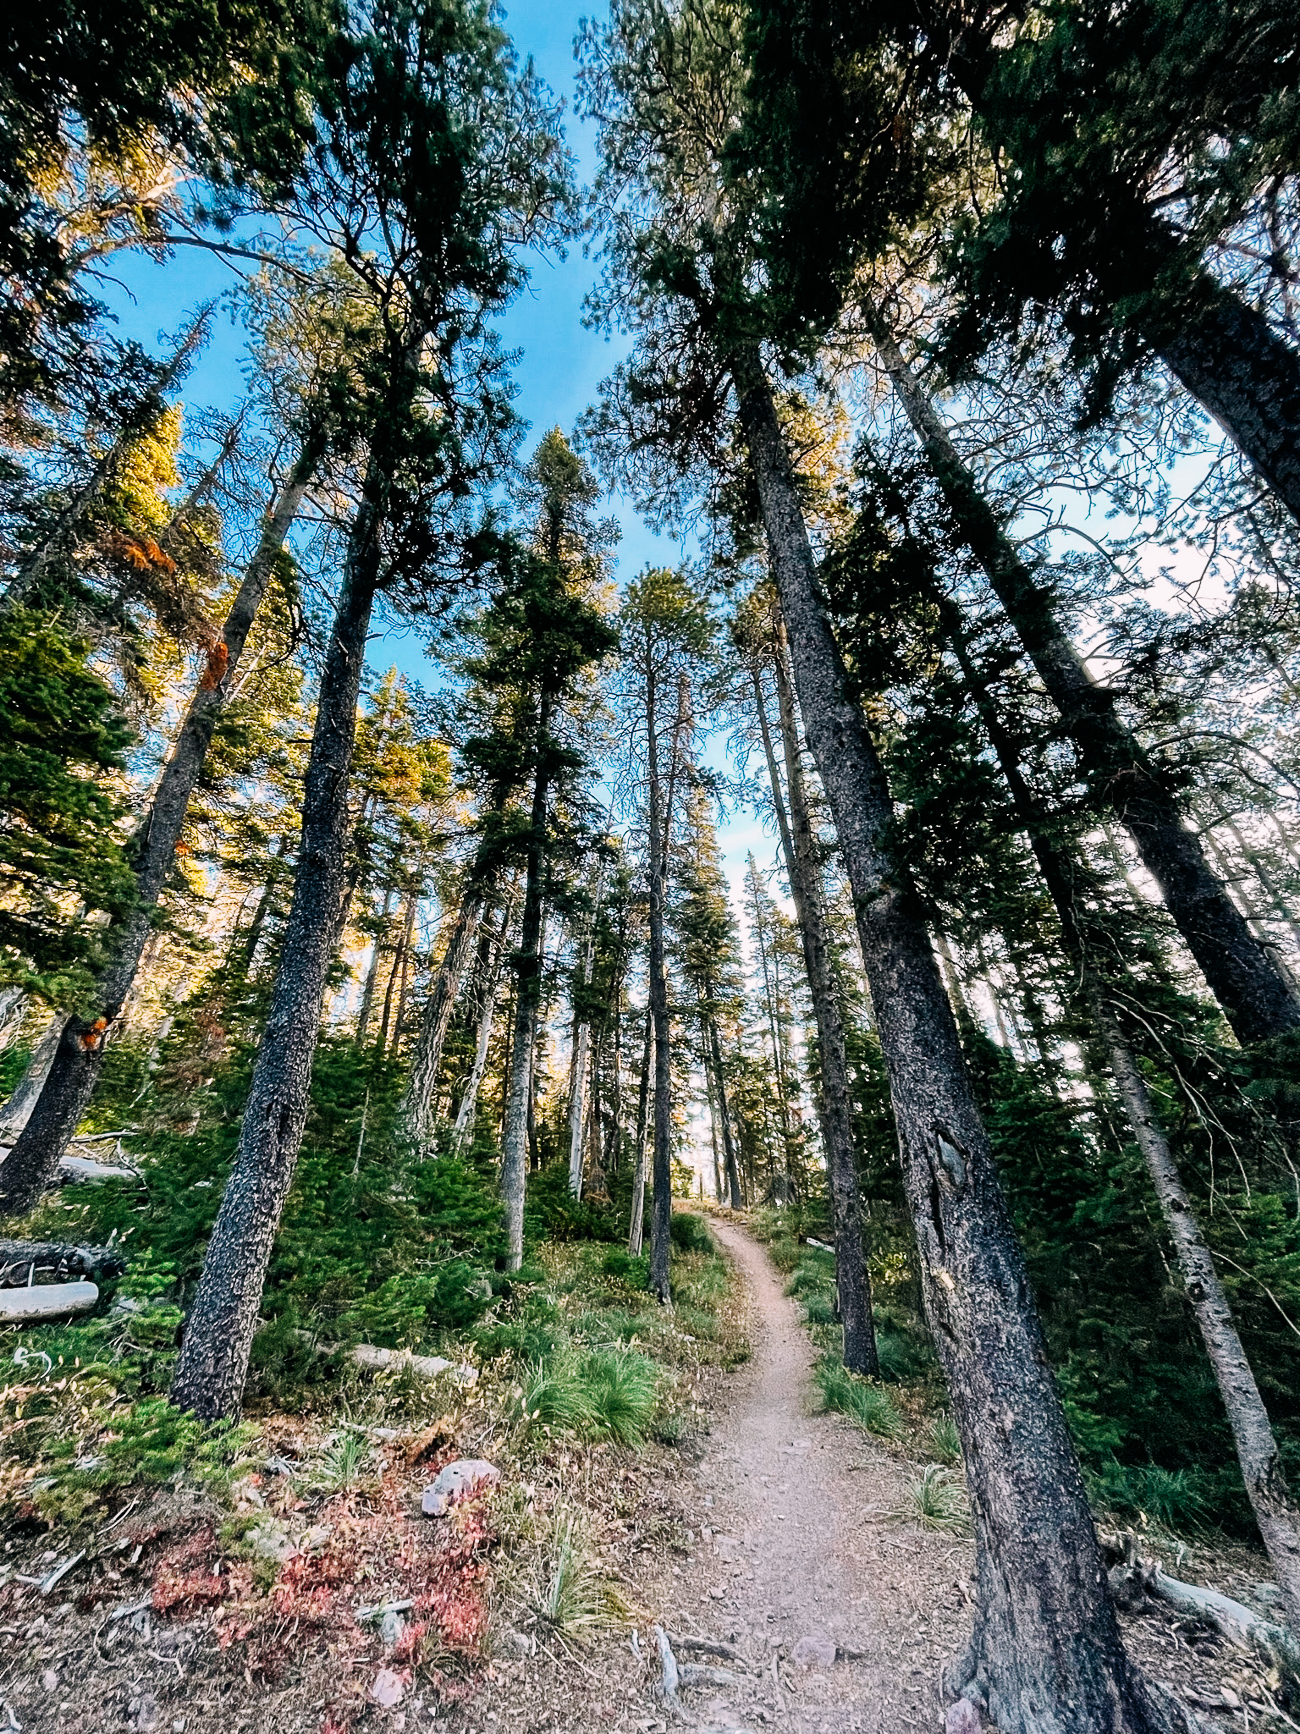 Trail through forest of evergreen trees